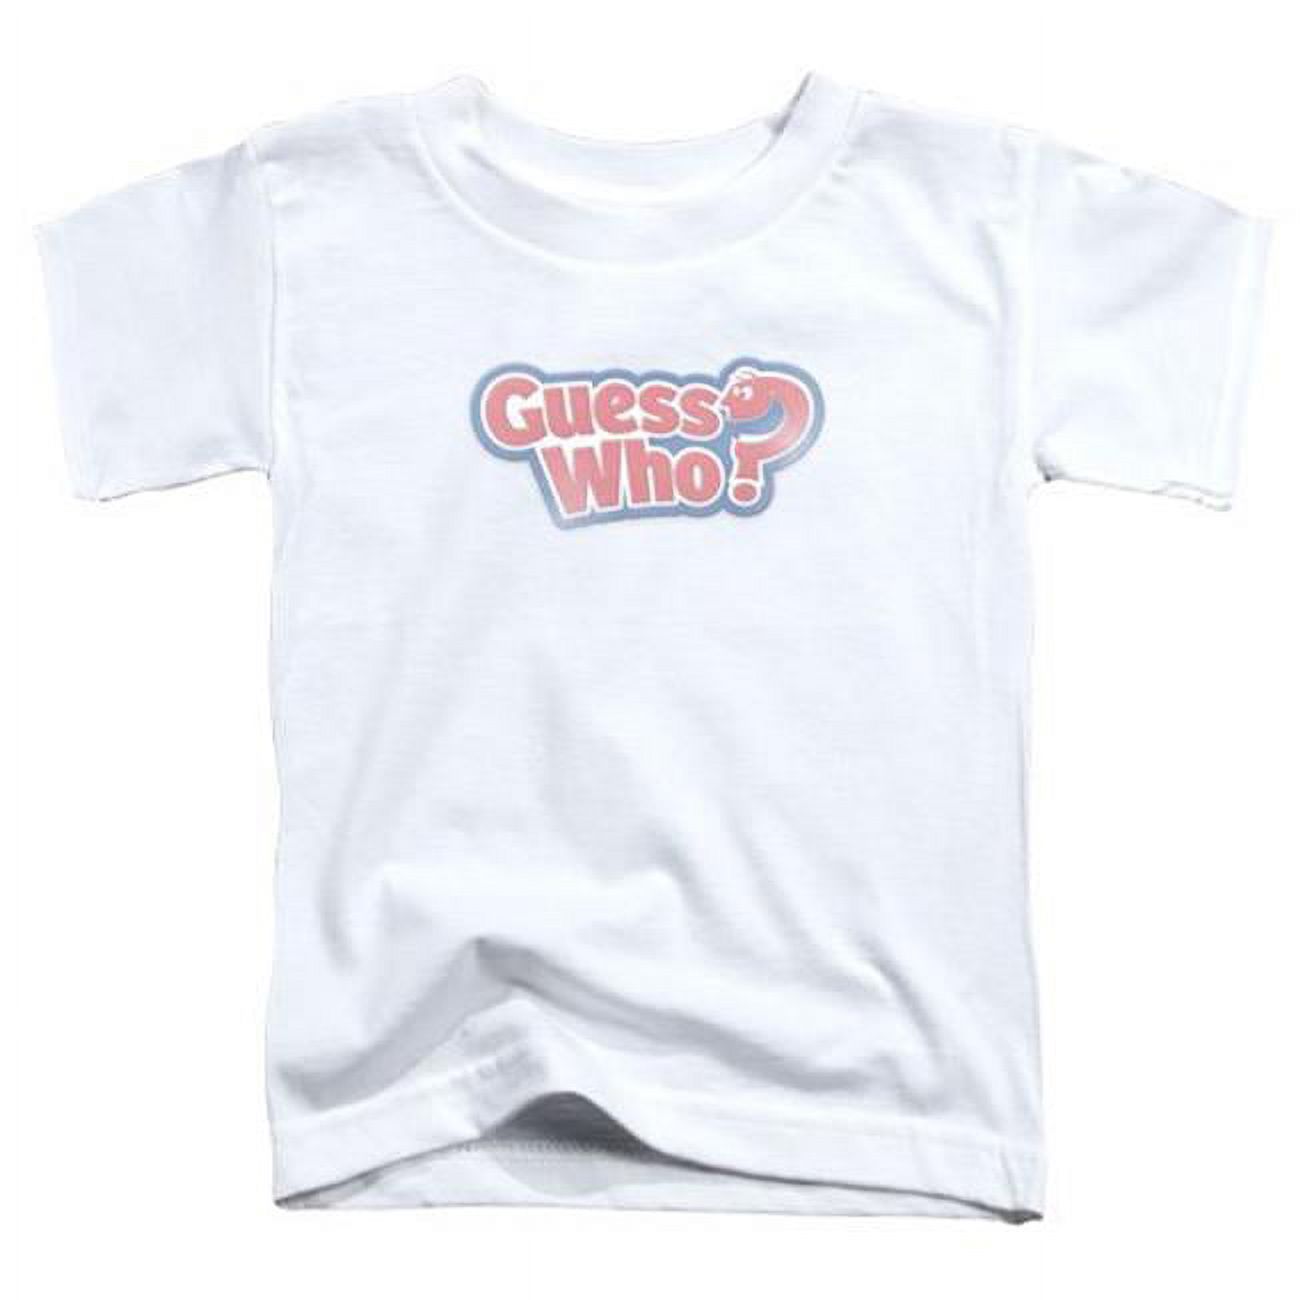 Trevco   Stretch Armstrong Badge Toddler Short Sleeve T-Shirt - White, Small 2T - image 1 of 1